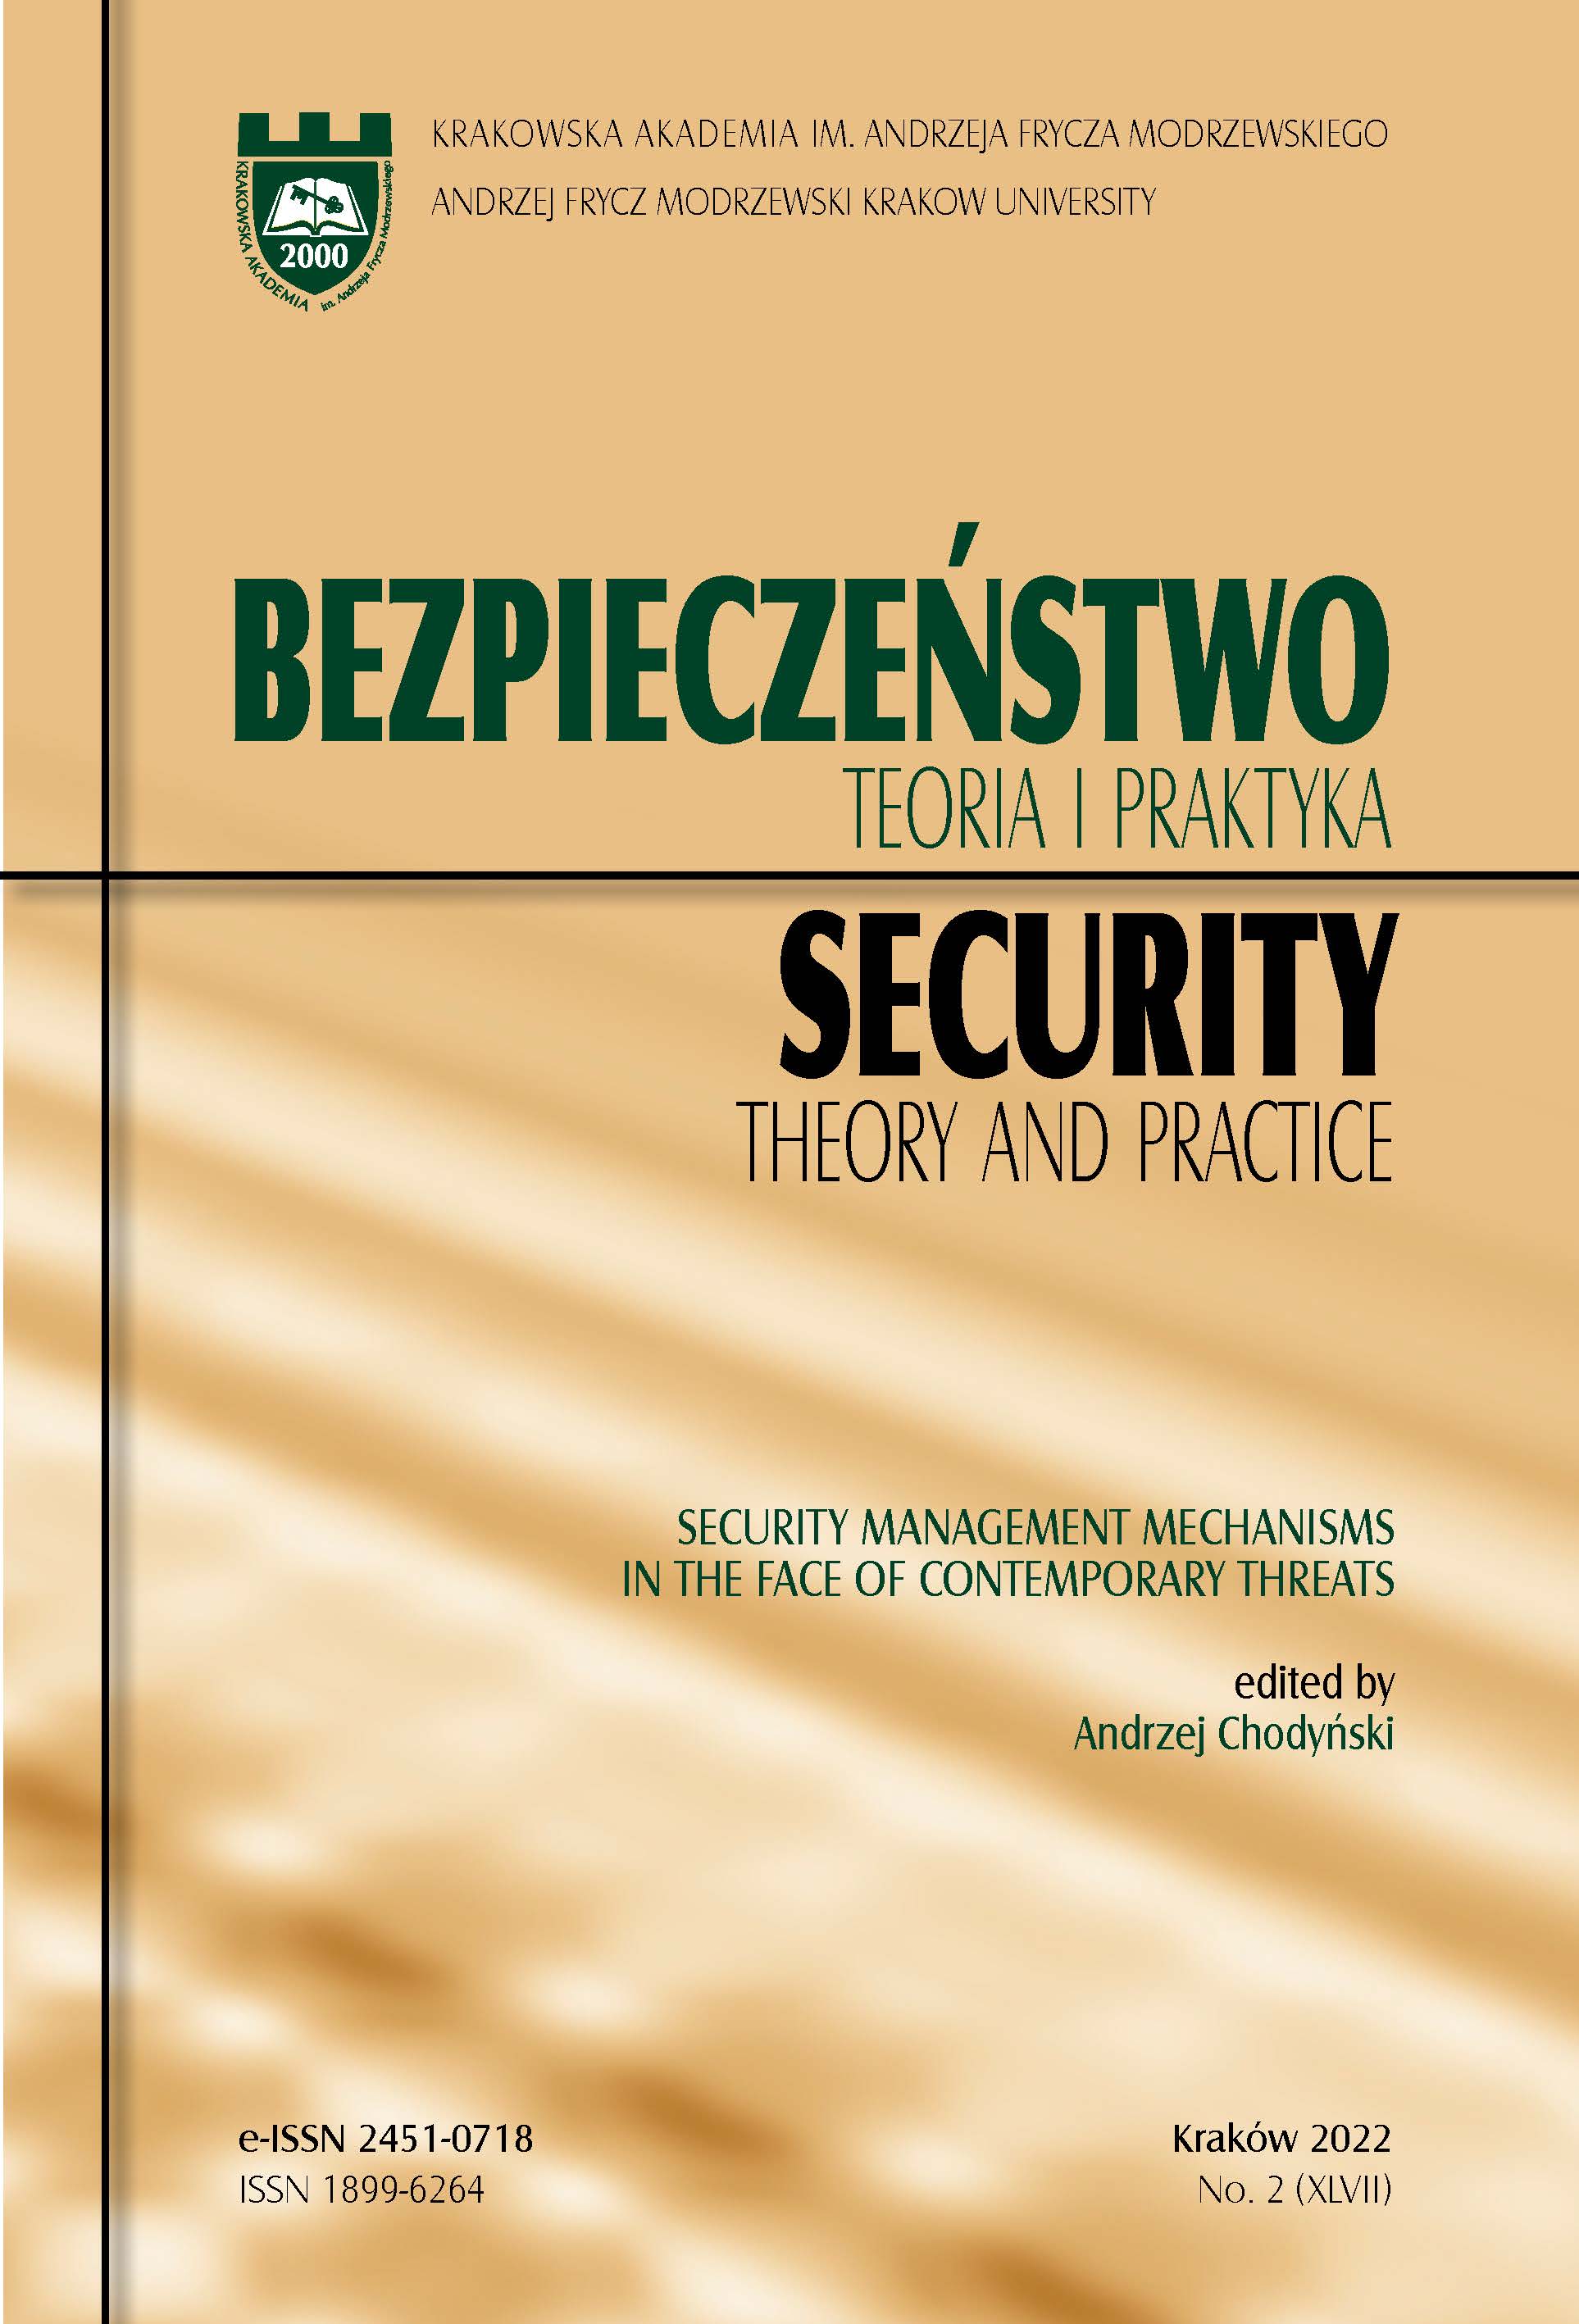 Security management mechanisms in the face of contemporary threats: Introduction Cover Image